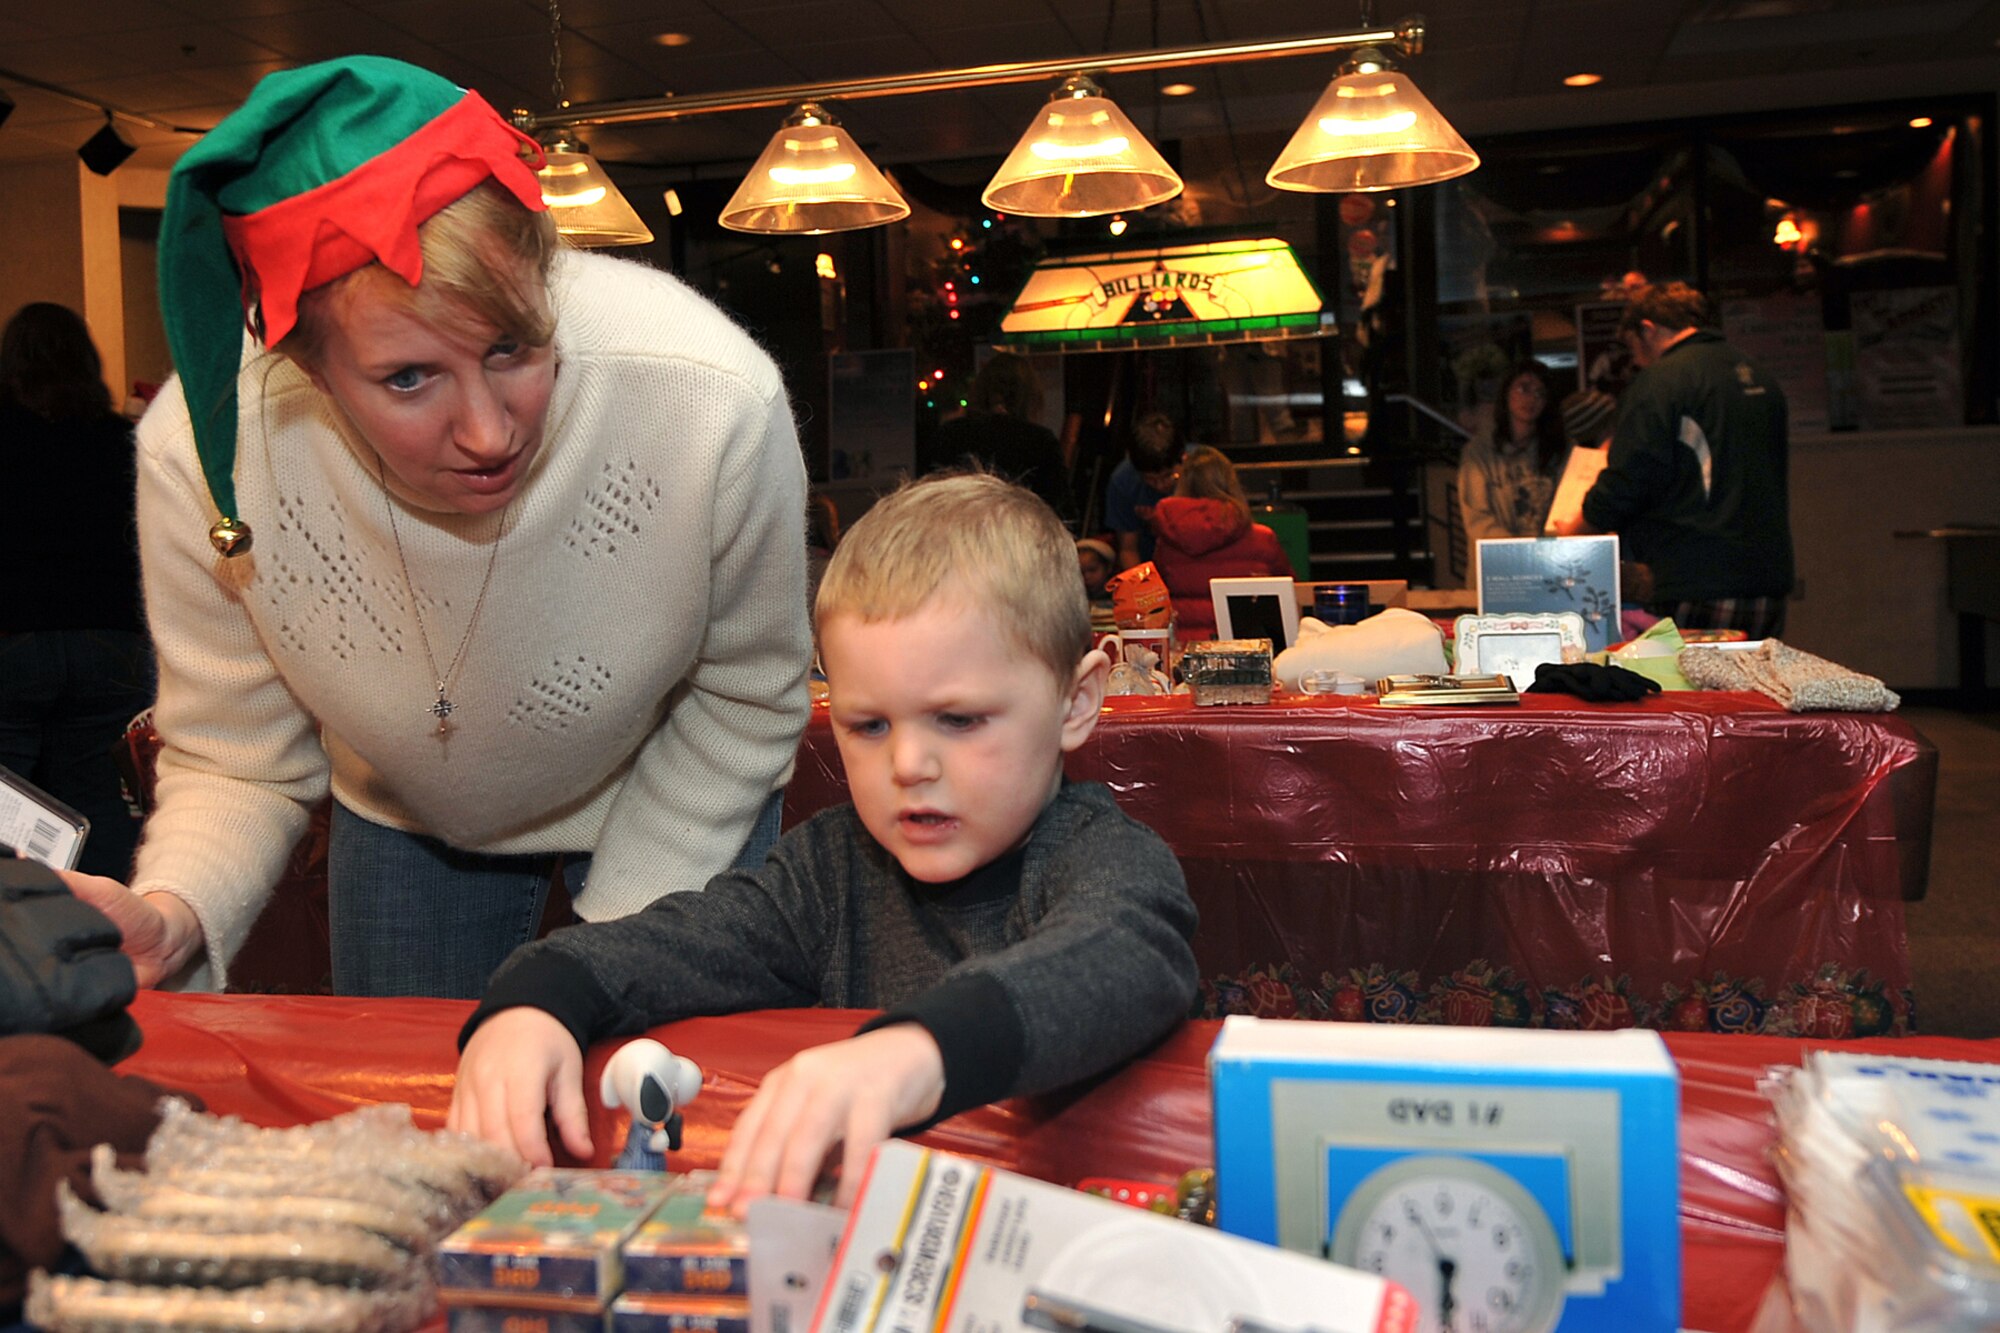 OFFUTT AIR FORCE BASE, Neb. - Mary Jensen, wife of the 55th Wing vice commander Col. William Jensen, helps Cohen Wiebers pick out a gift for his father, Army Staff Sgt. Chad Wiebers, during the tree lighting and holiday events inside the Community Activity Center Dec. 2. This annual event provides Team Offutt member and their families a fun environment to share their joy and give presents to their love ones this Christmas season.  U.S. Air Force Photo by Charles Haymond